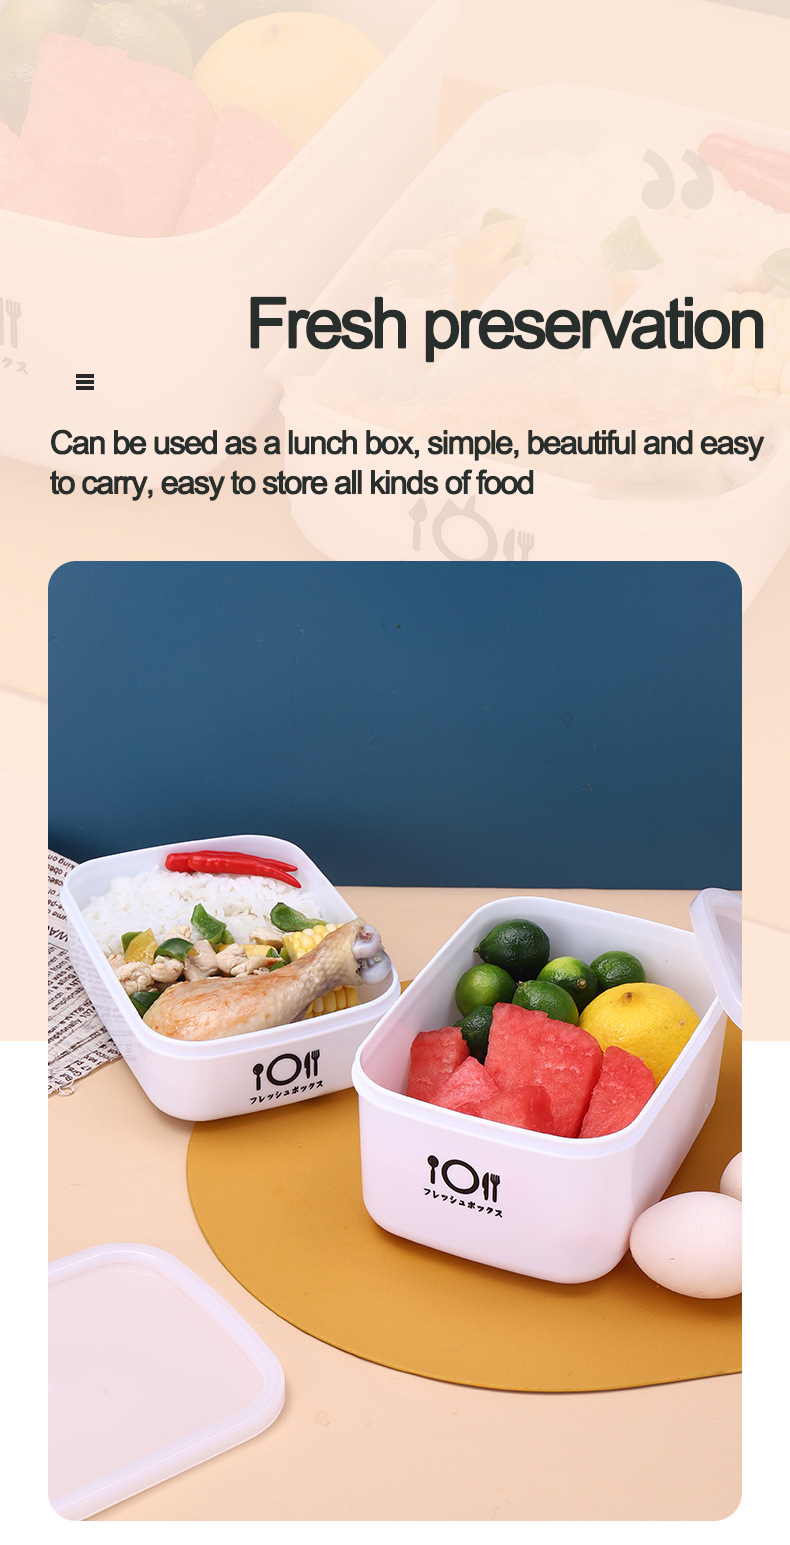 Airtight Food Storage Box Meal Prep Containers with Lids Portable Office School Lunch Box Multi-function Leak-proof Plastic Kids